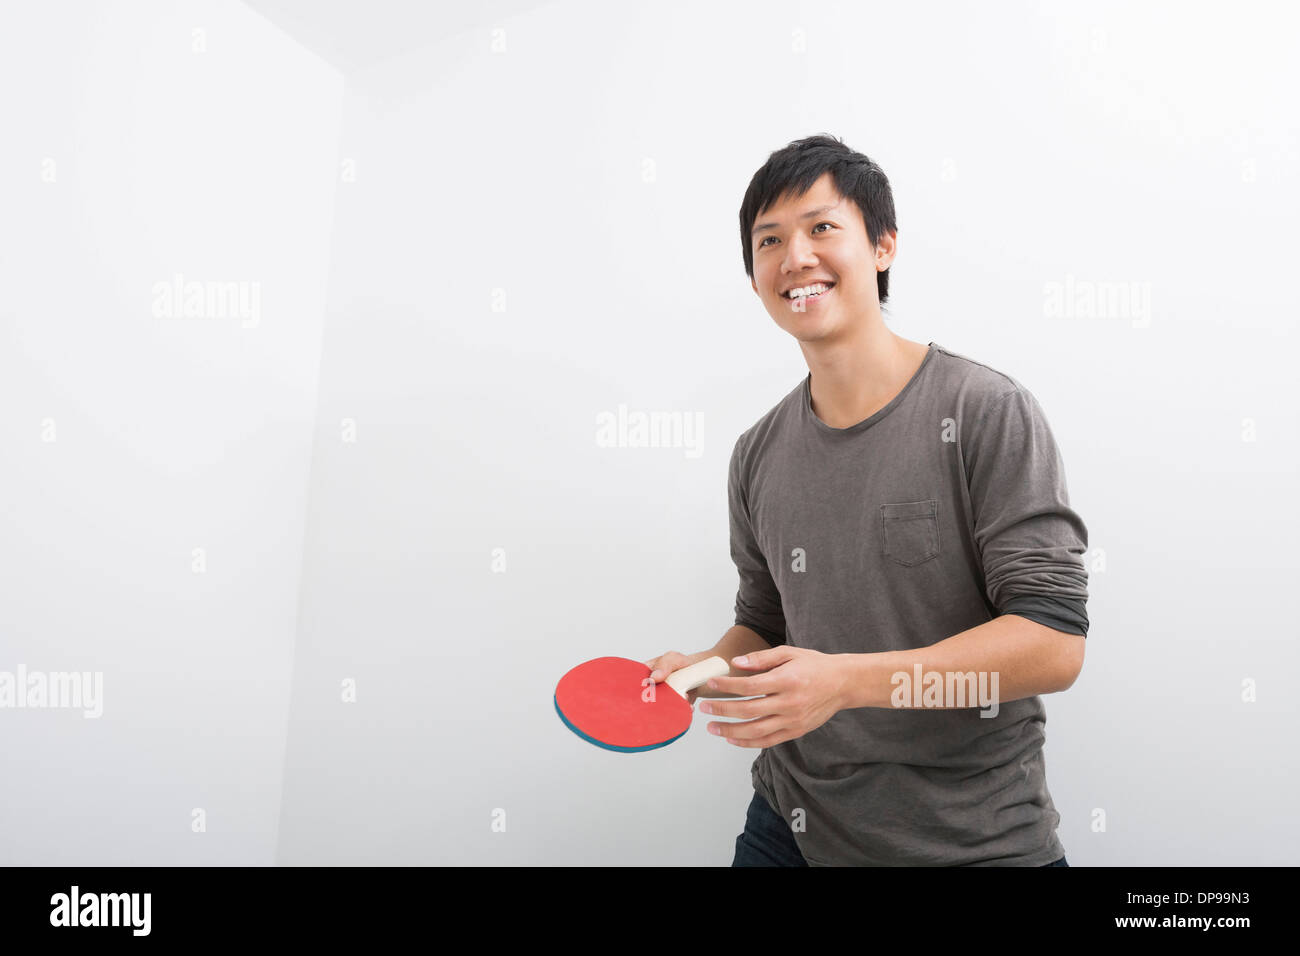 Handsome mid adult man holding table tennis paddle Stock Photo